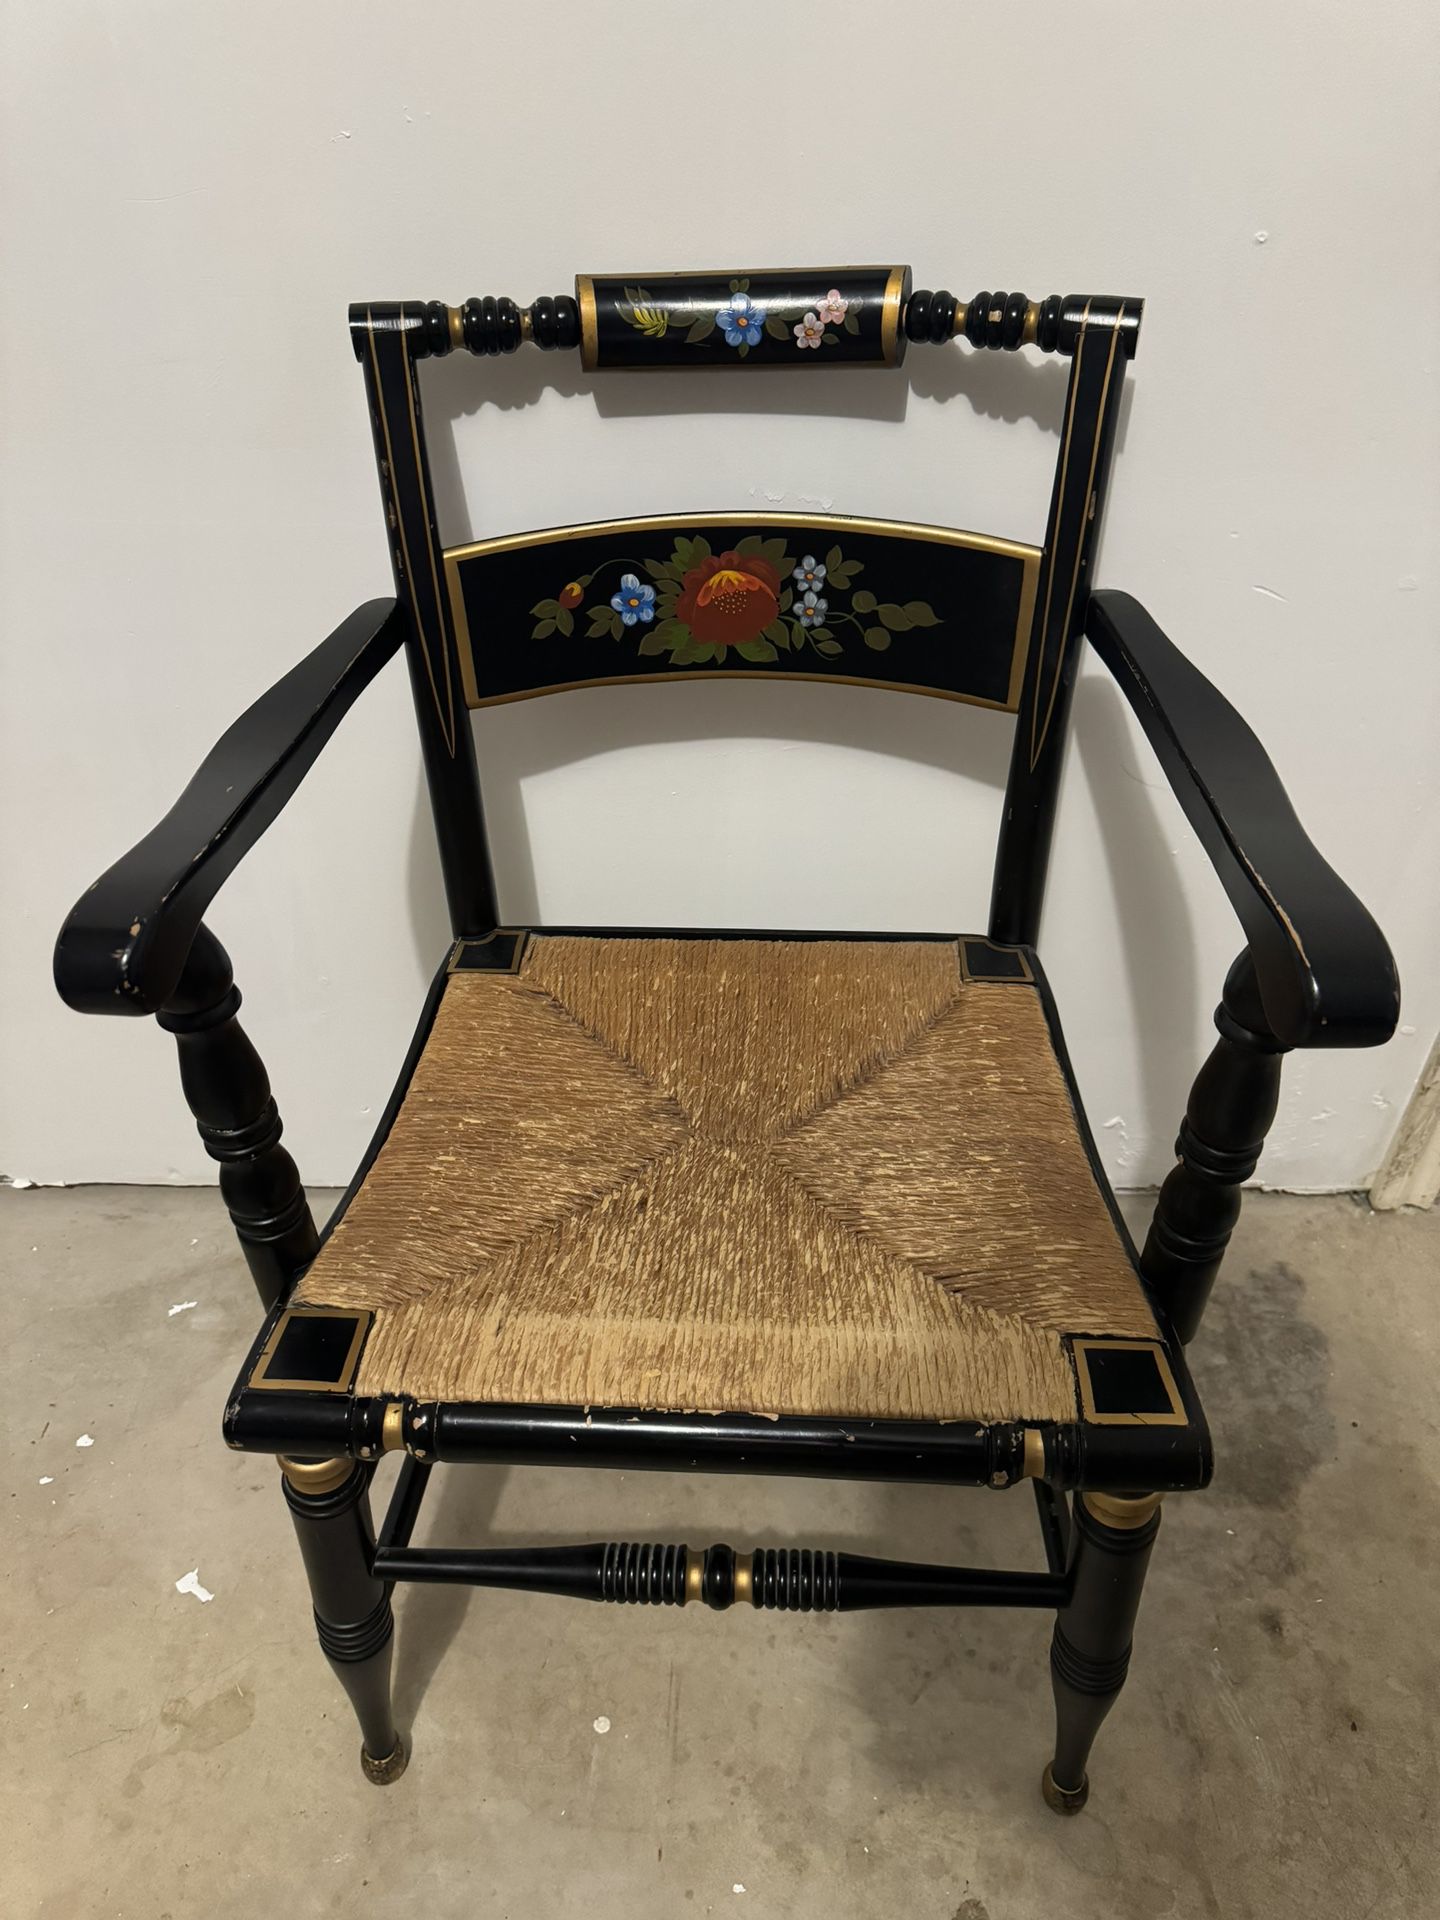 Vintage ‘Boling Chair Company’ Hitchcock Style Dining Chair (Black with Flowers)